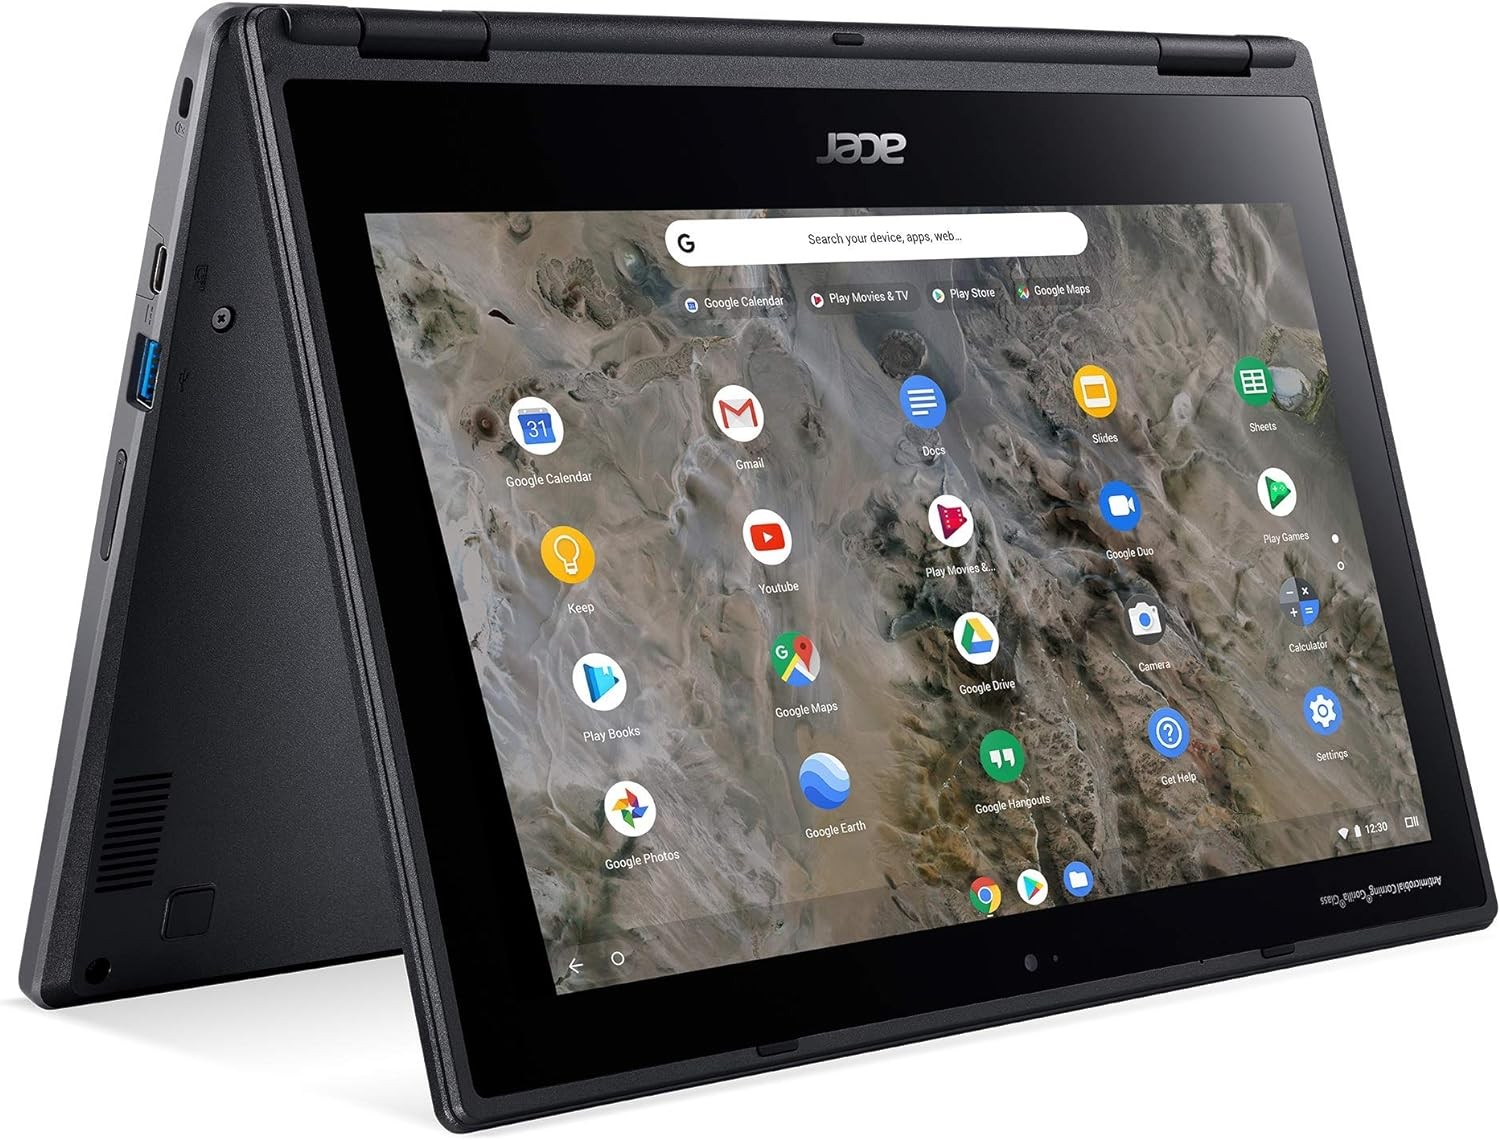 Acer Chromebook Spin 311 R721t 62zq 116 Touchscreen 2 In 1 Chromebook 1366 X 768 A Series 4414